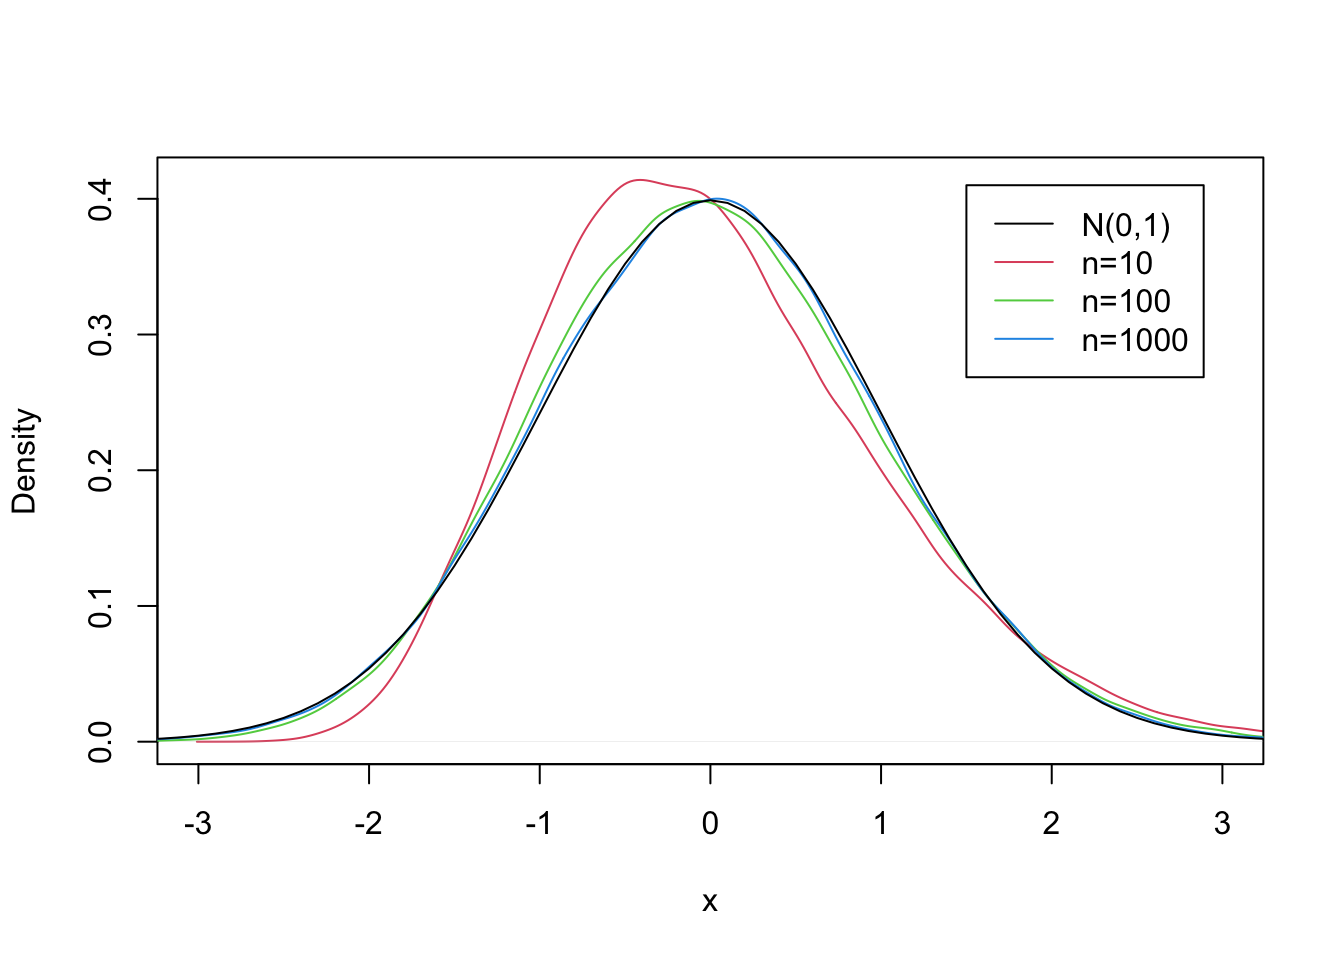 The CLT for the Exponential(0.5) Distribution